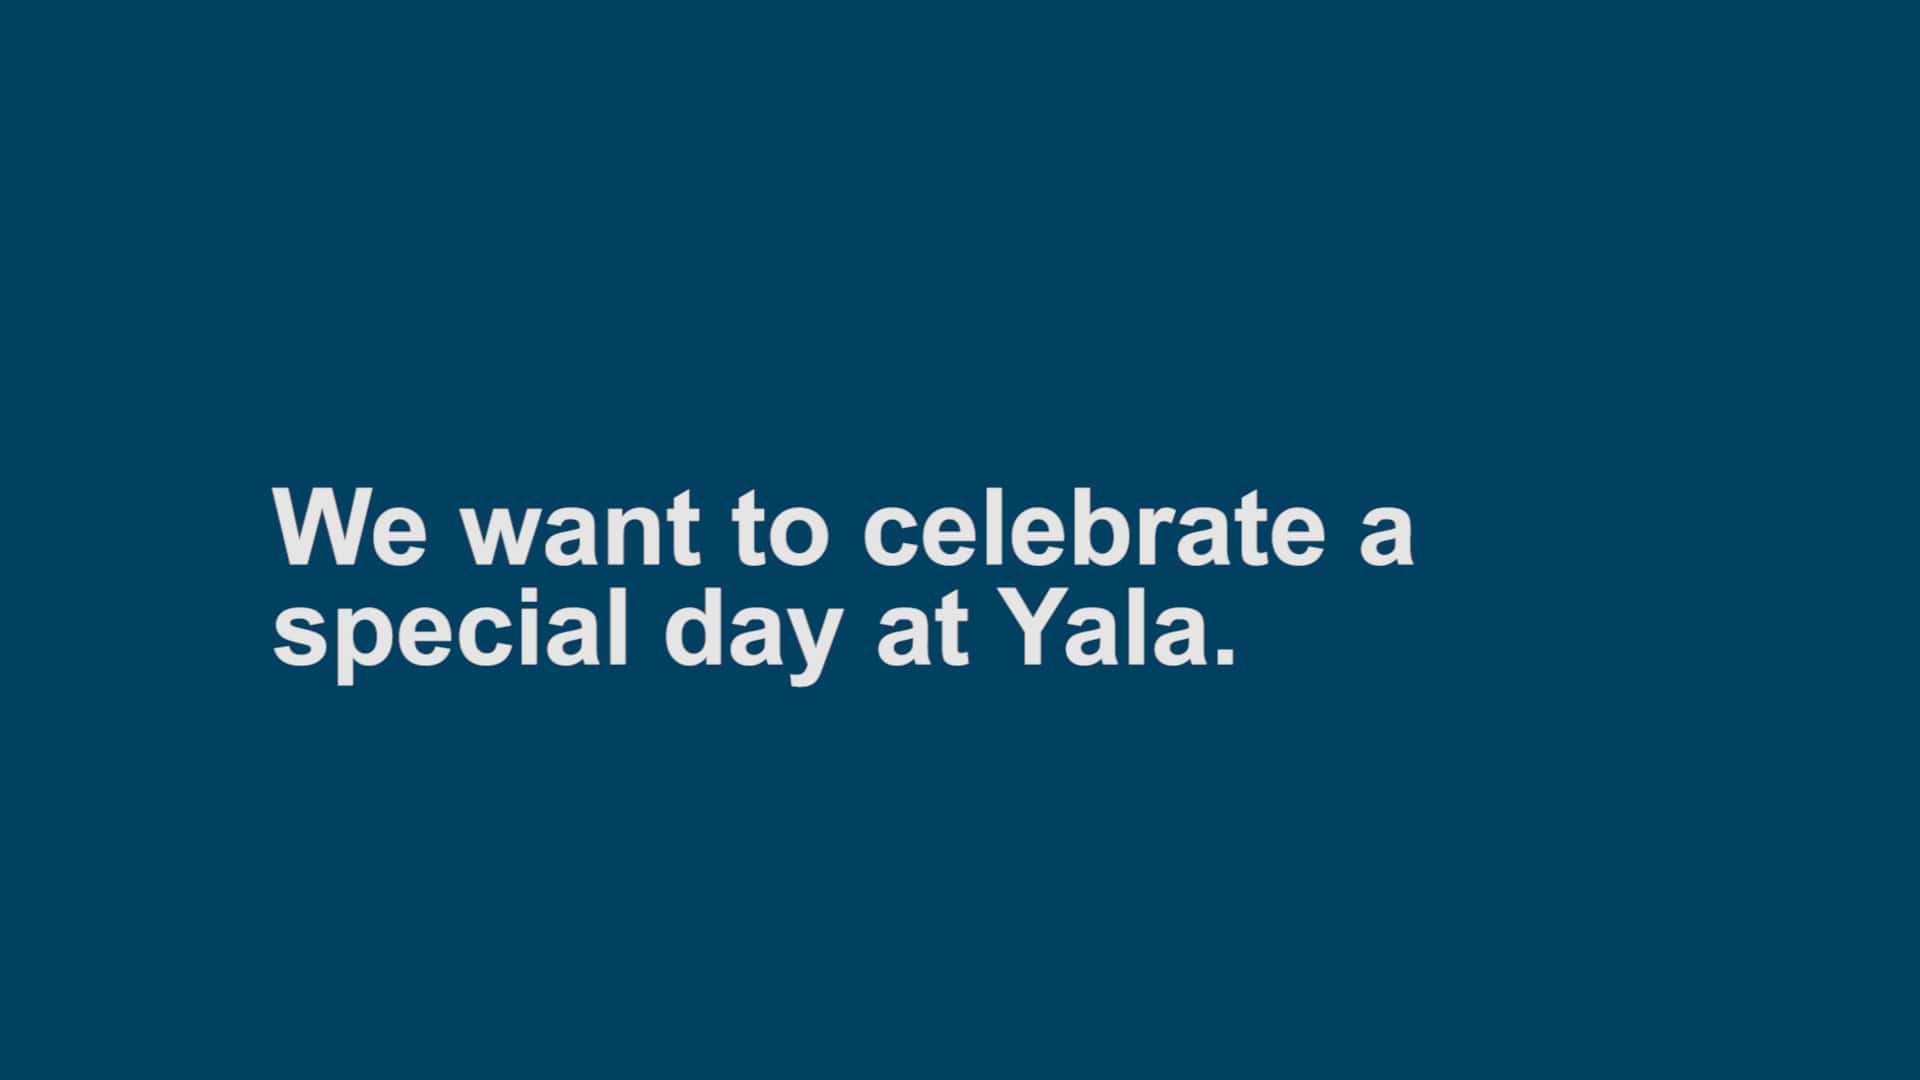 We want to celebrate a special day at Yala International Women Day at Yala